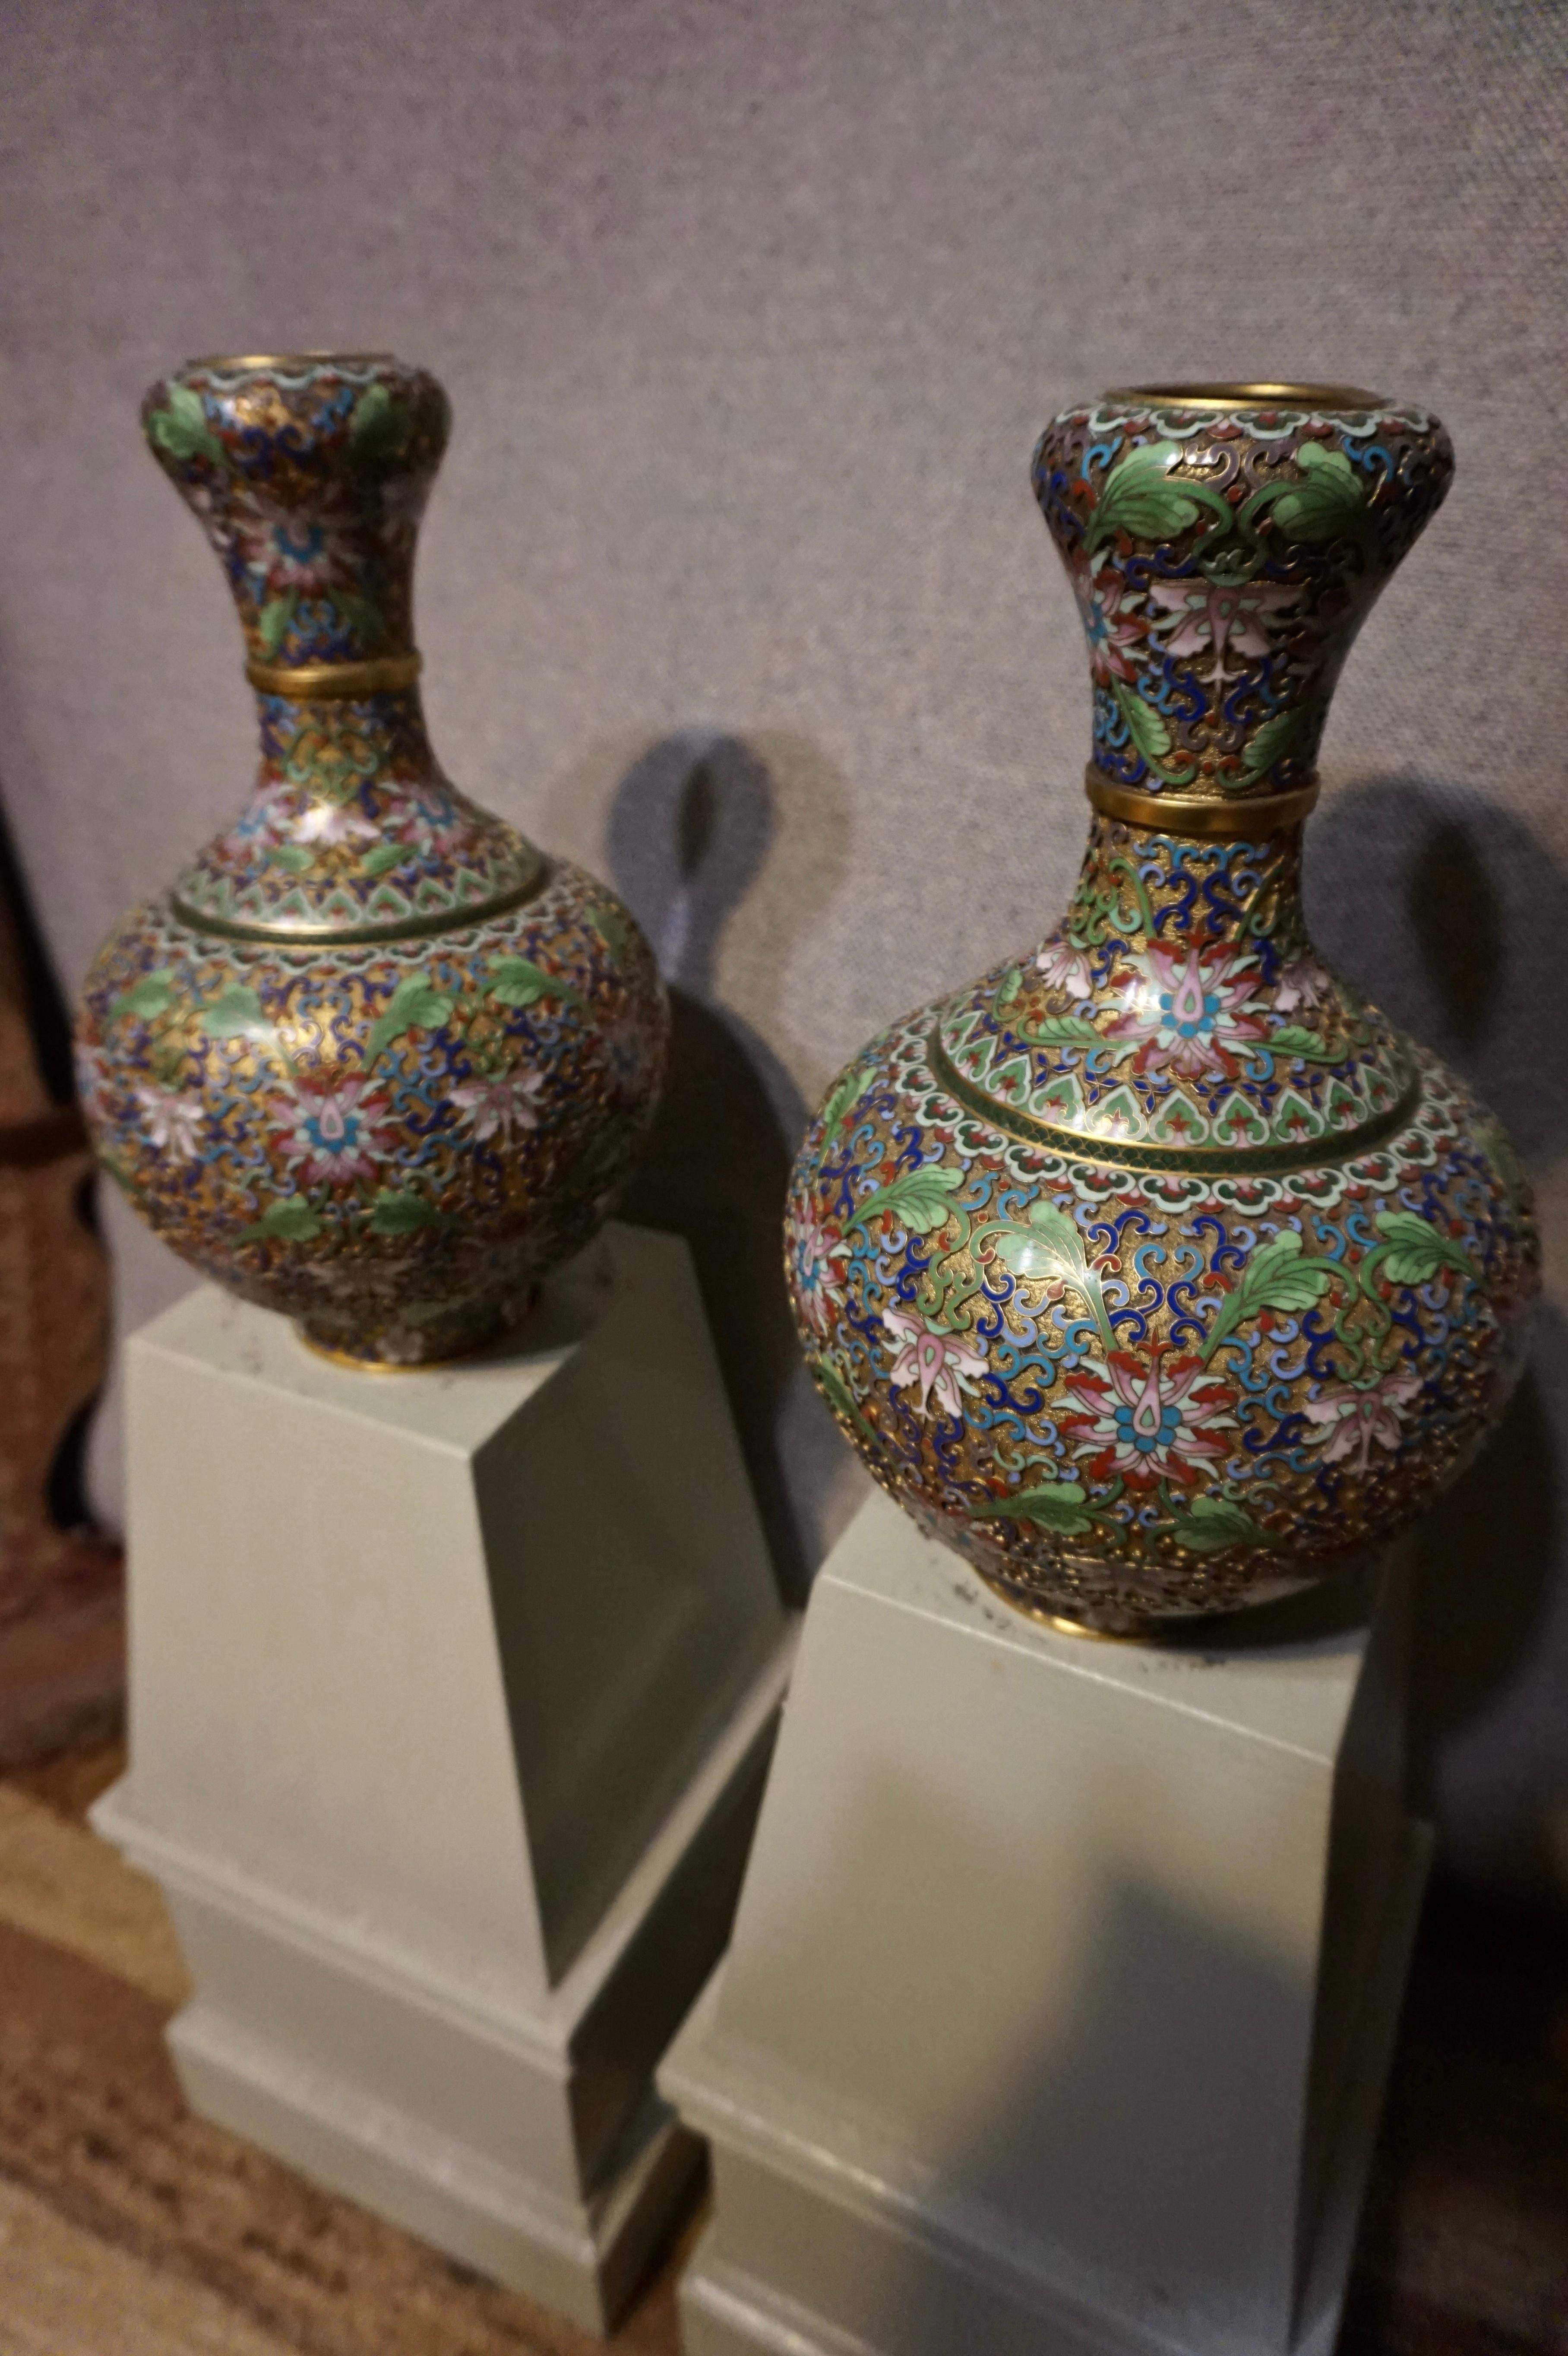 Chinese Export Pair of Fine Chinese Cloisonne Gooseneck Vases